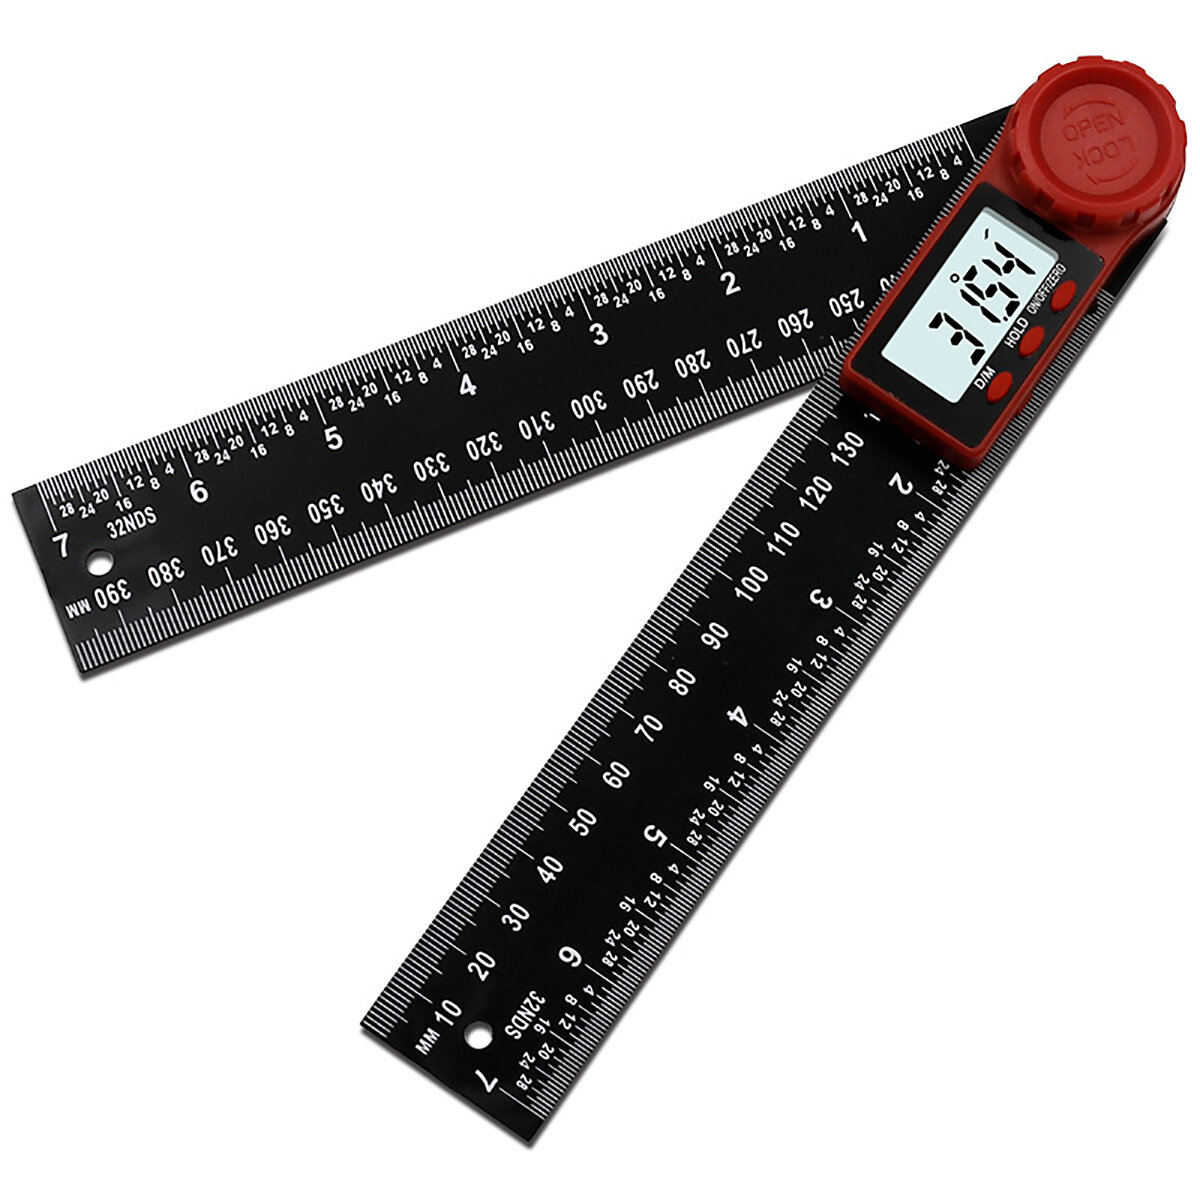 

2 In 1 Folding Digital LCD Angle Finder Ruler Stainless Steel Ruler 360 Degree Protractor